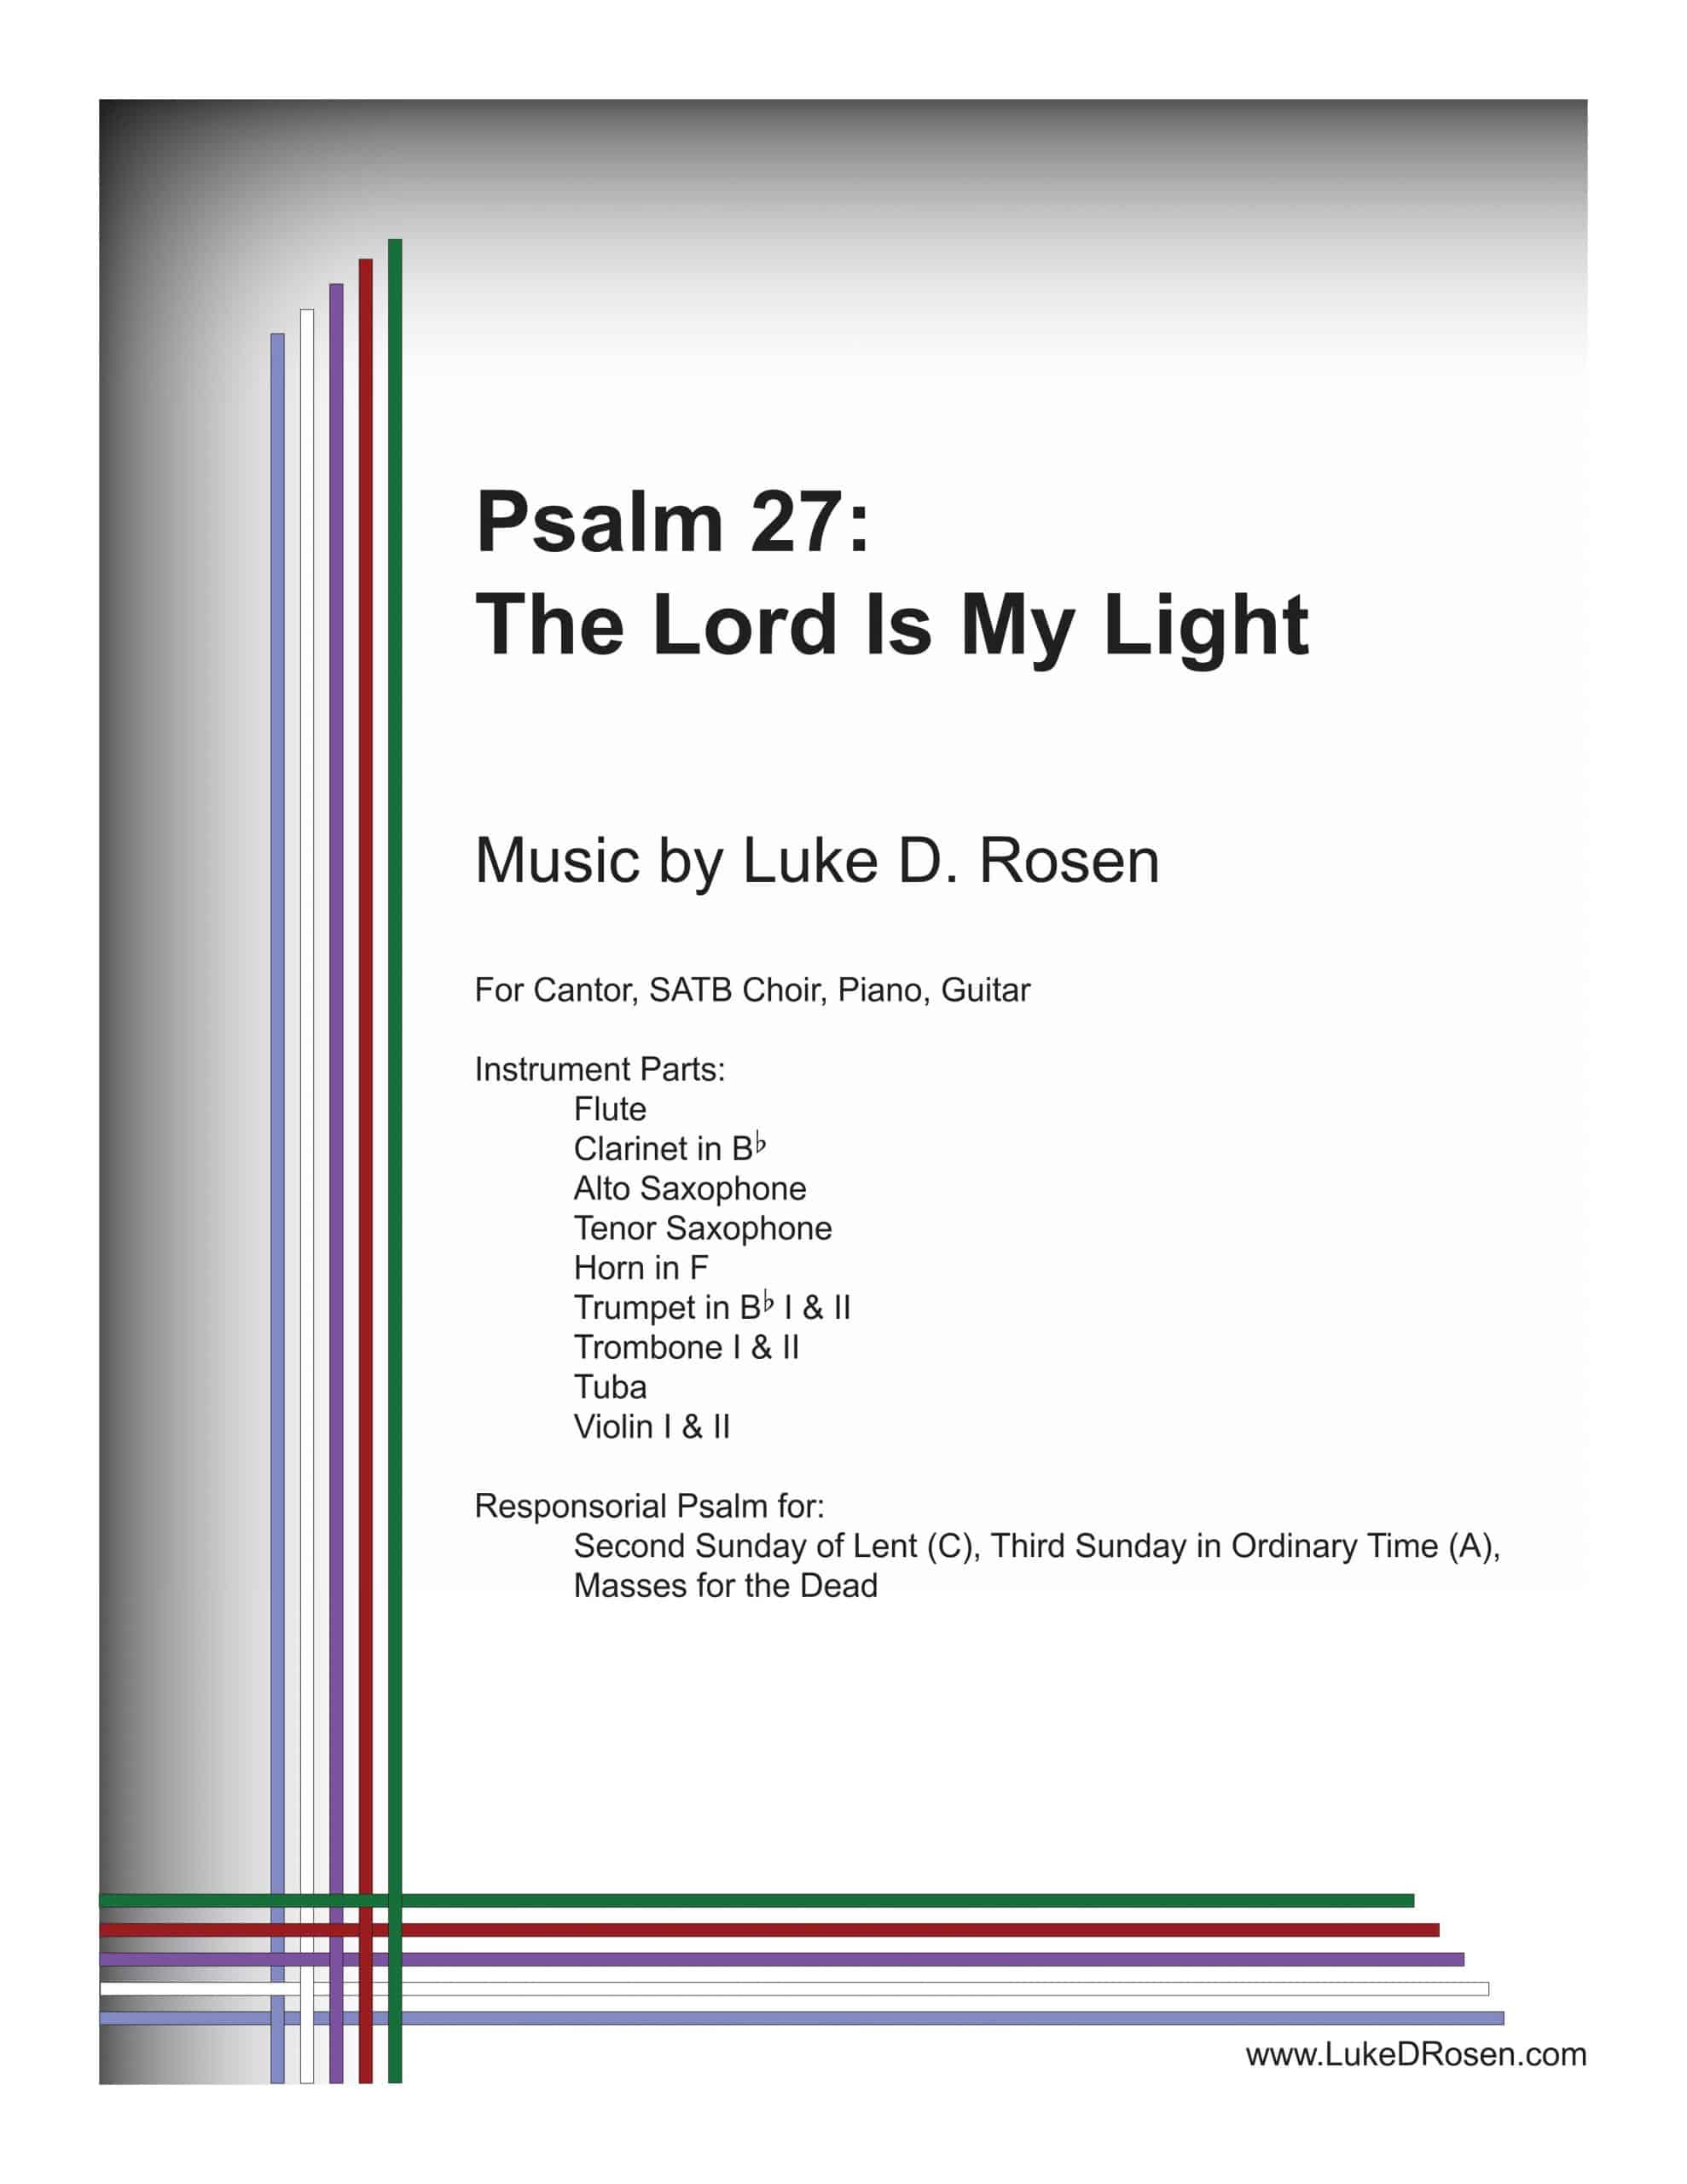 Psalm 27 – The Lord is My Light (Rosen)